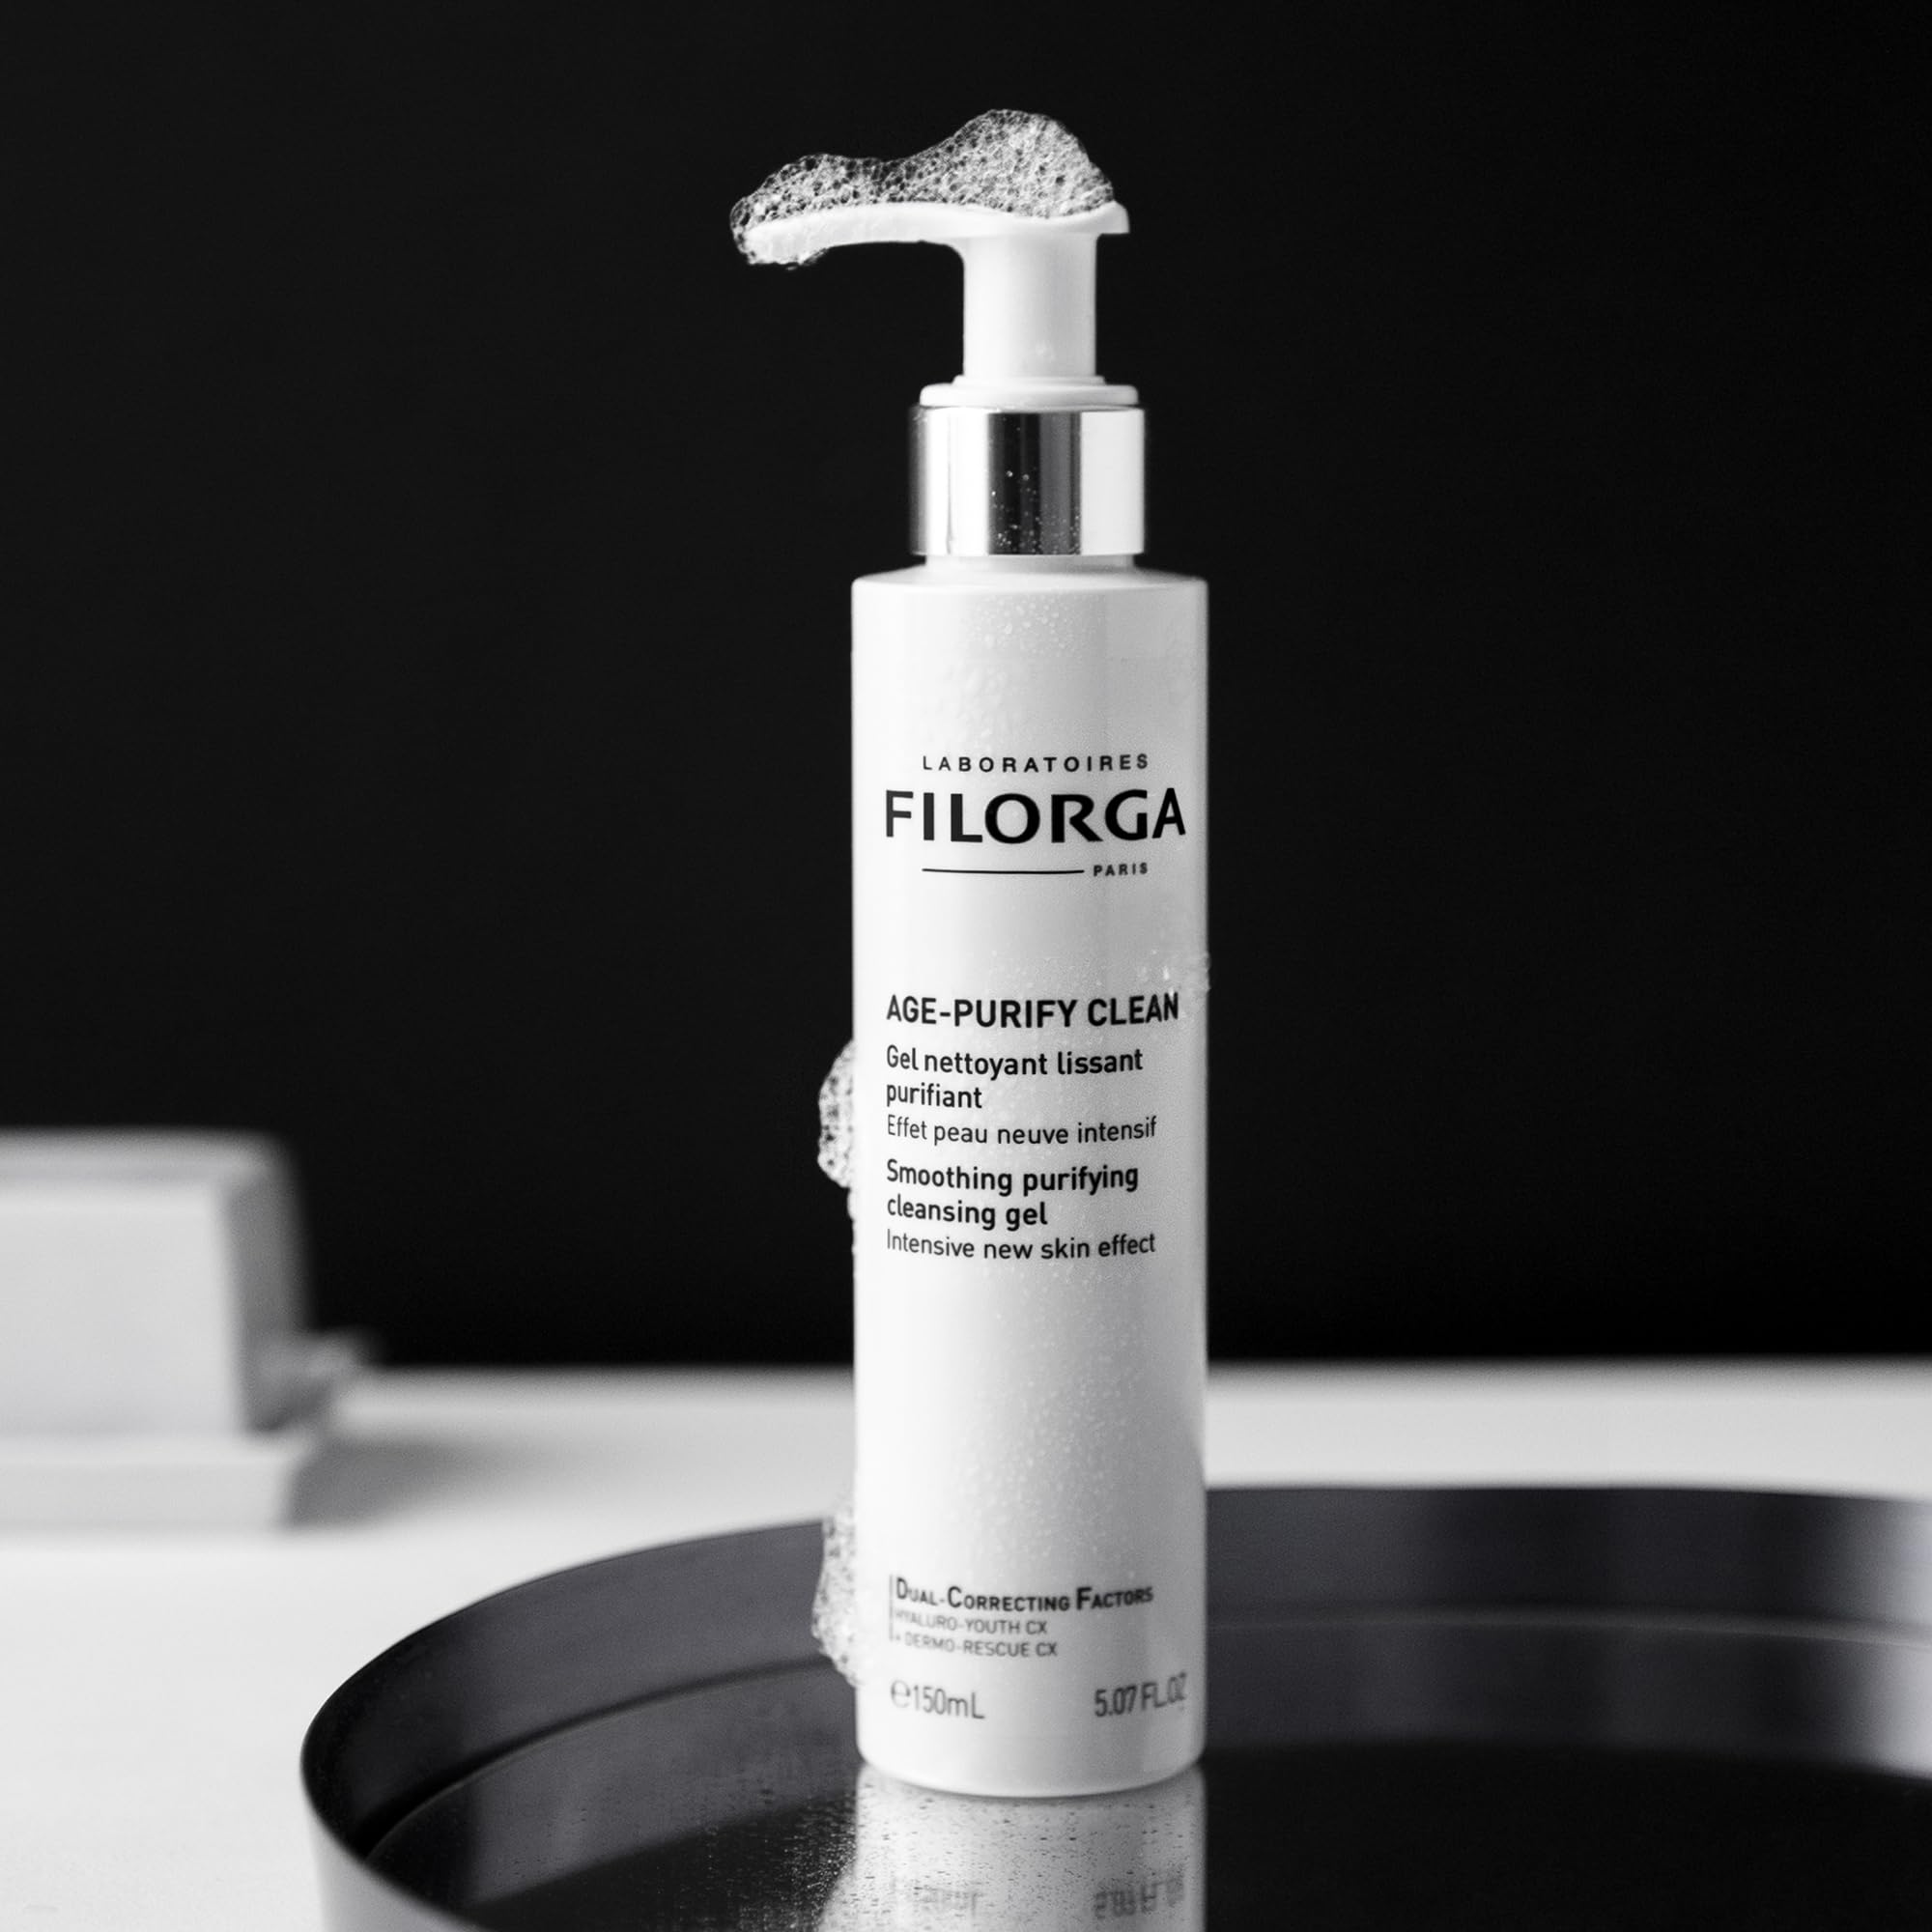 Filorga Age-Purify Face Cleansing Gel, Smooth and Purify Skin with A Foaming Gel Enriched With Polysaccharides to Remove Impurities and Protect Against External Pollutants, 5.07 fl. oz.